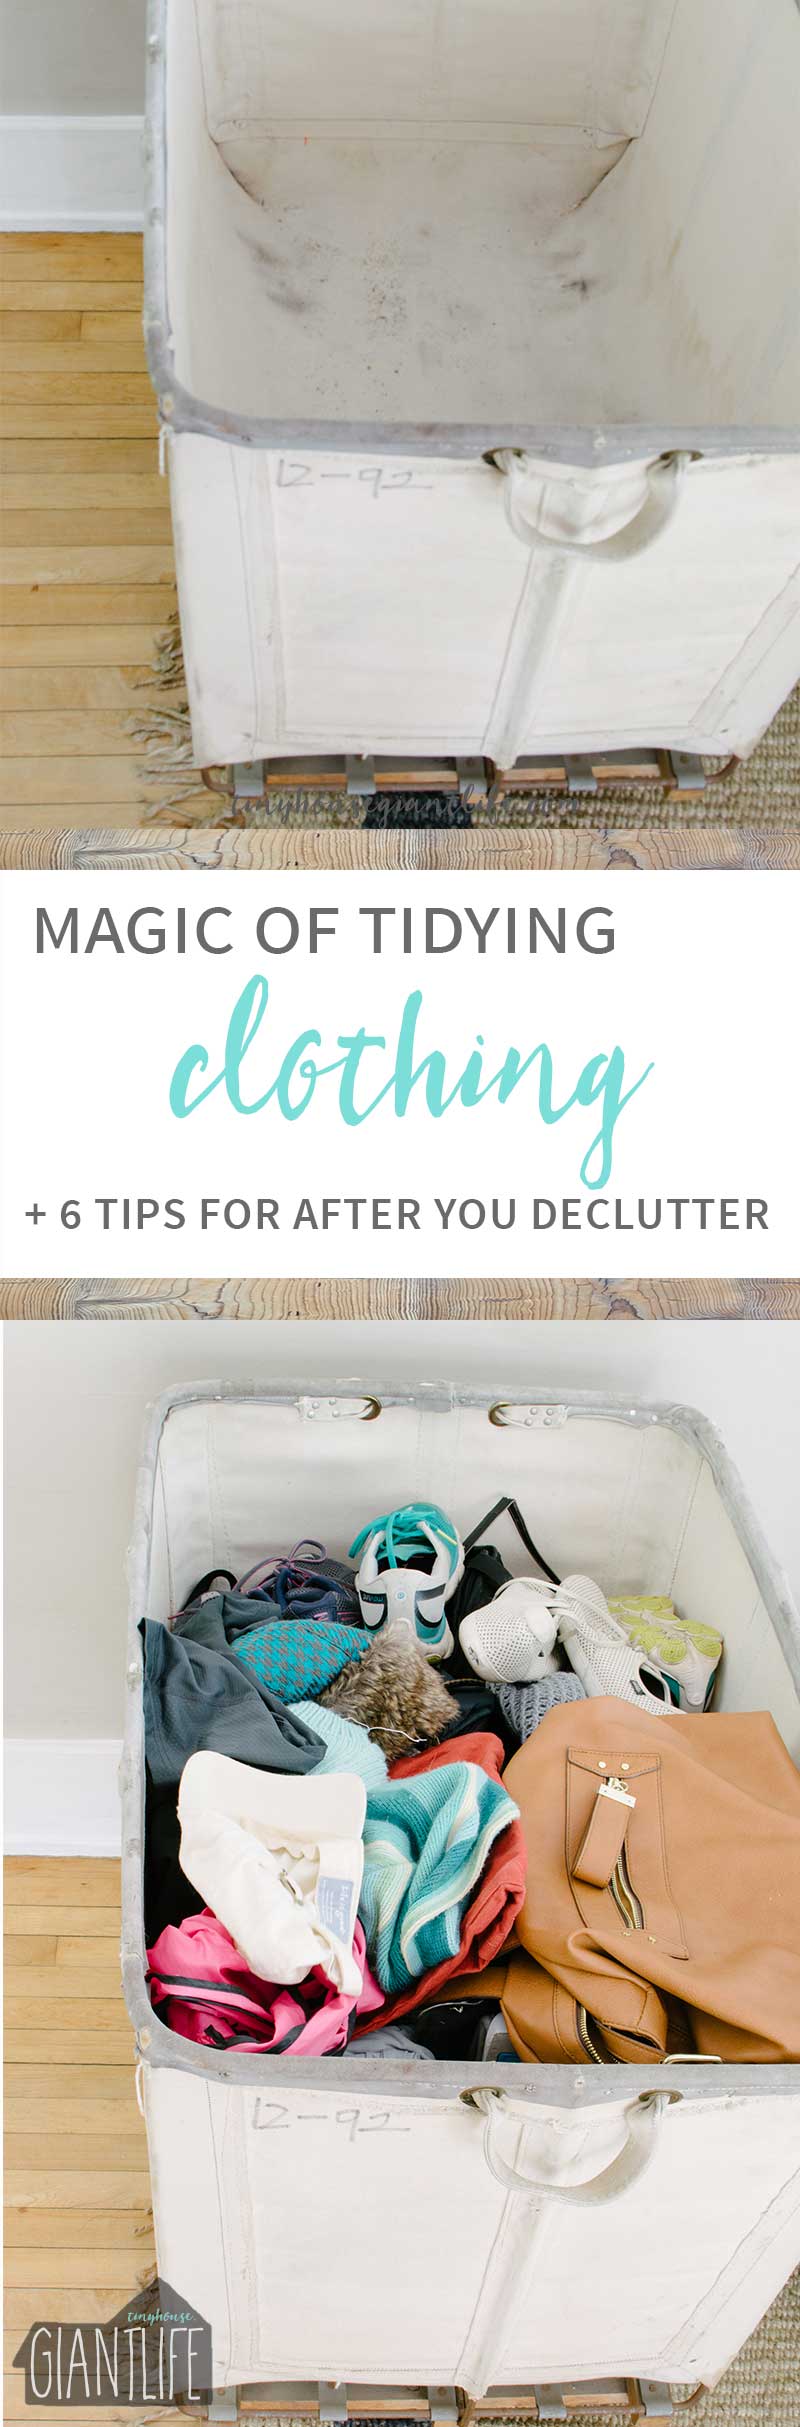 How to declutter clothing using the magic of tidying process |Organization | Clothing Organization 